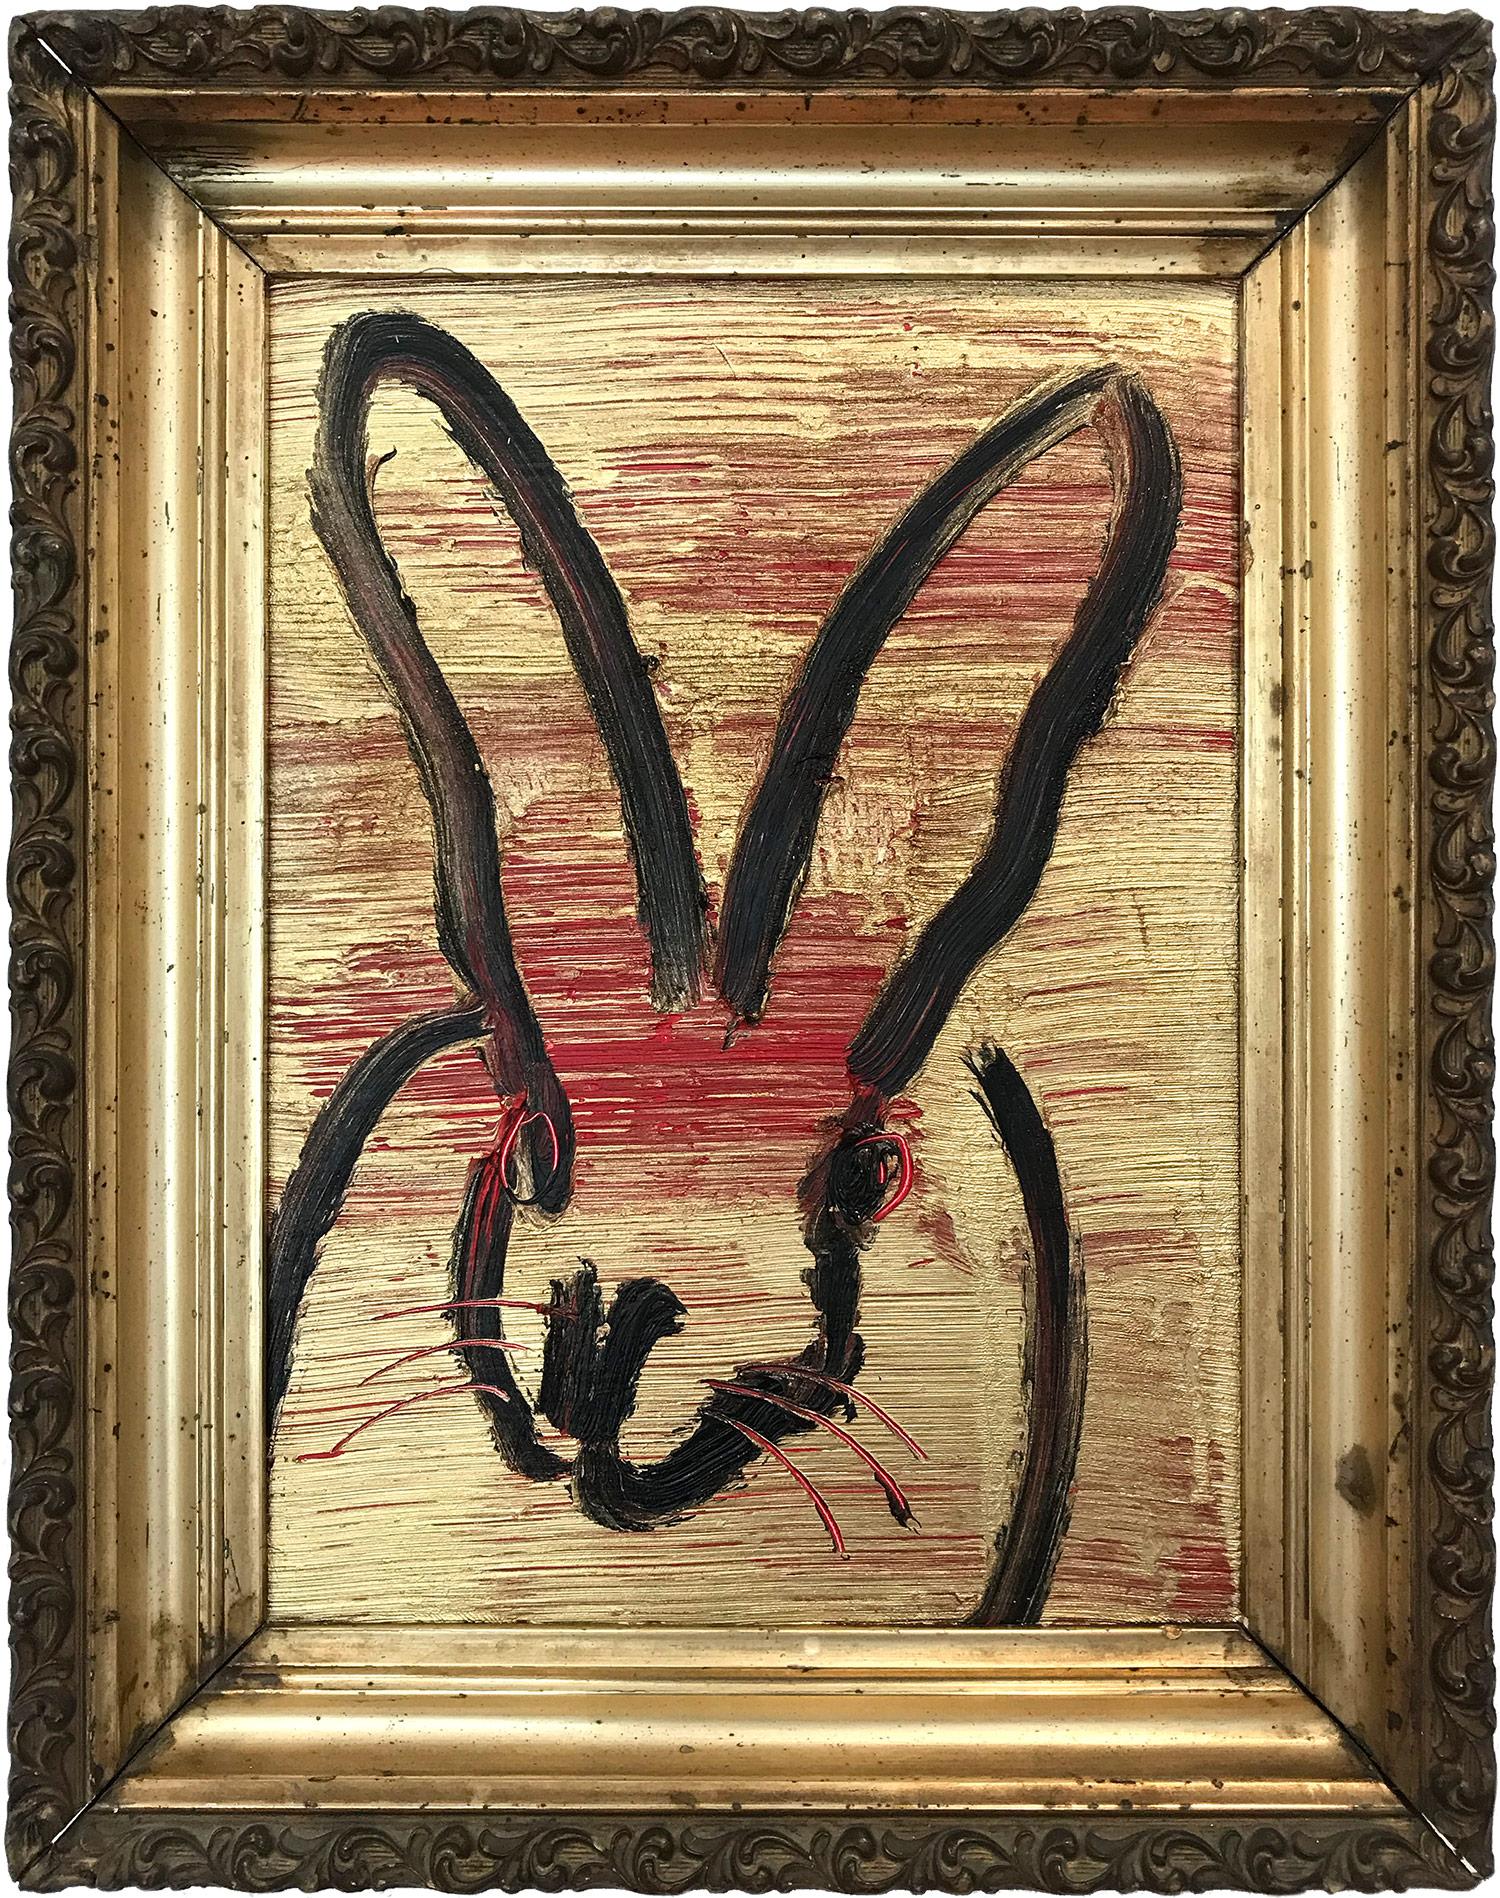 Hunt Slonem Abstract Painting - "Ruby Tues 2" (Black Bunny on Gold with Red accents) Oil on Wood Panel Painting